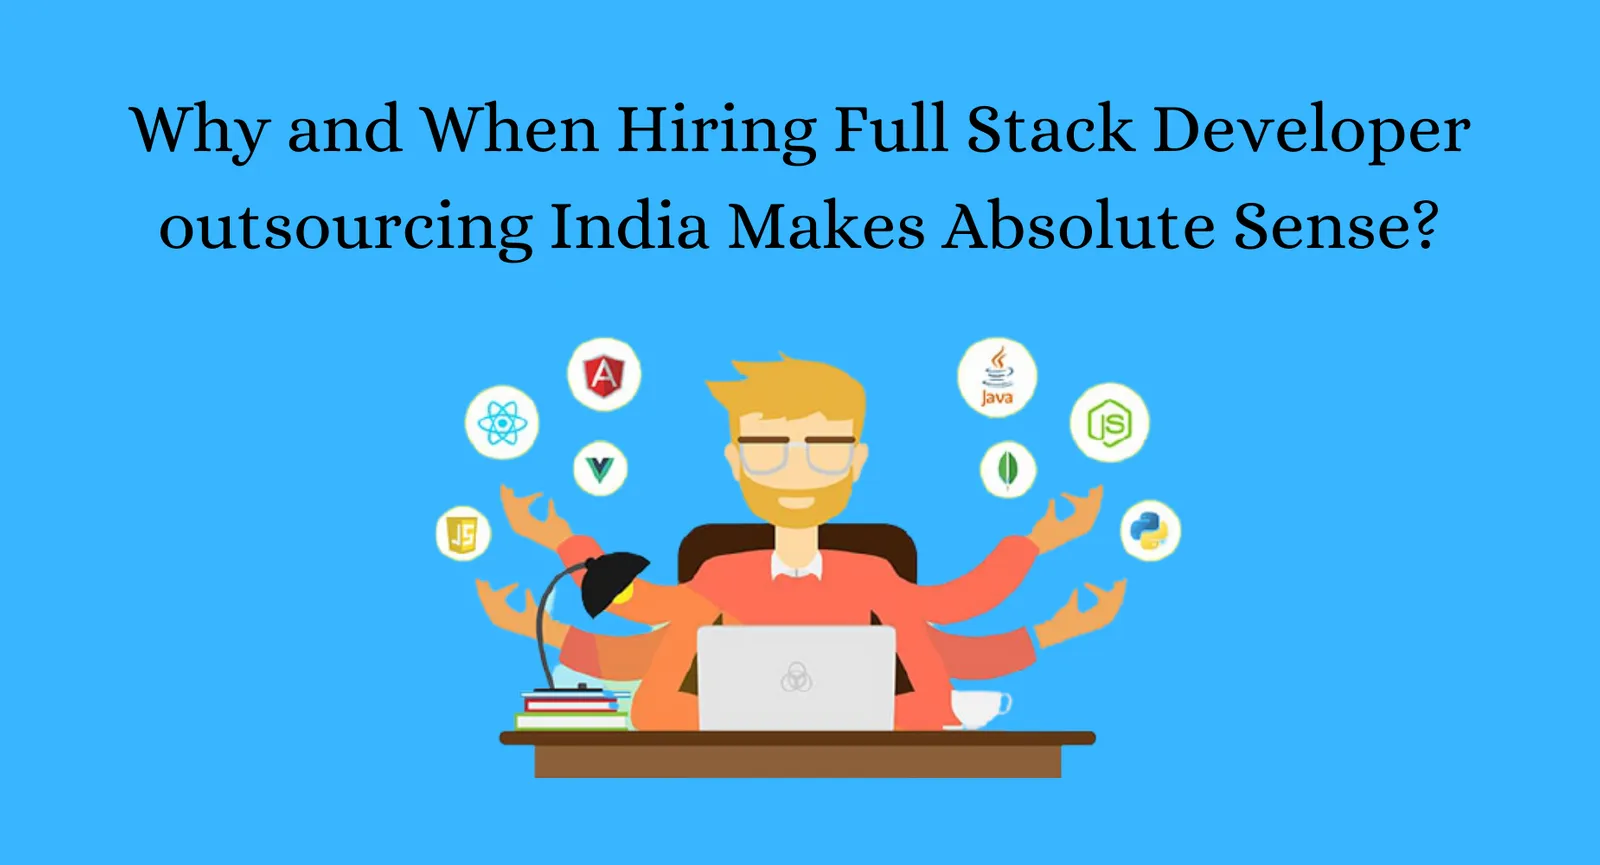 Why and When Hiring Full Stack Developer outsourcing India Makes Absolute Sense?